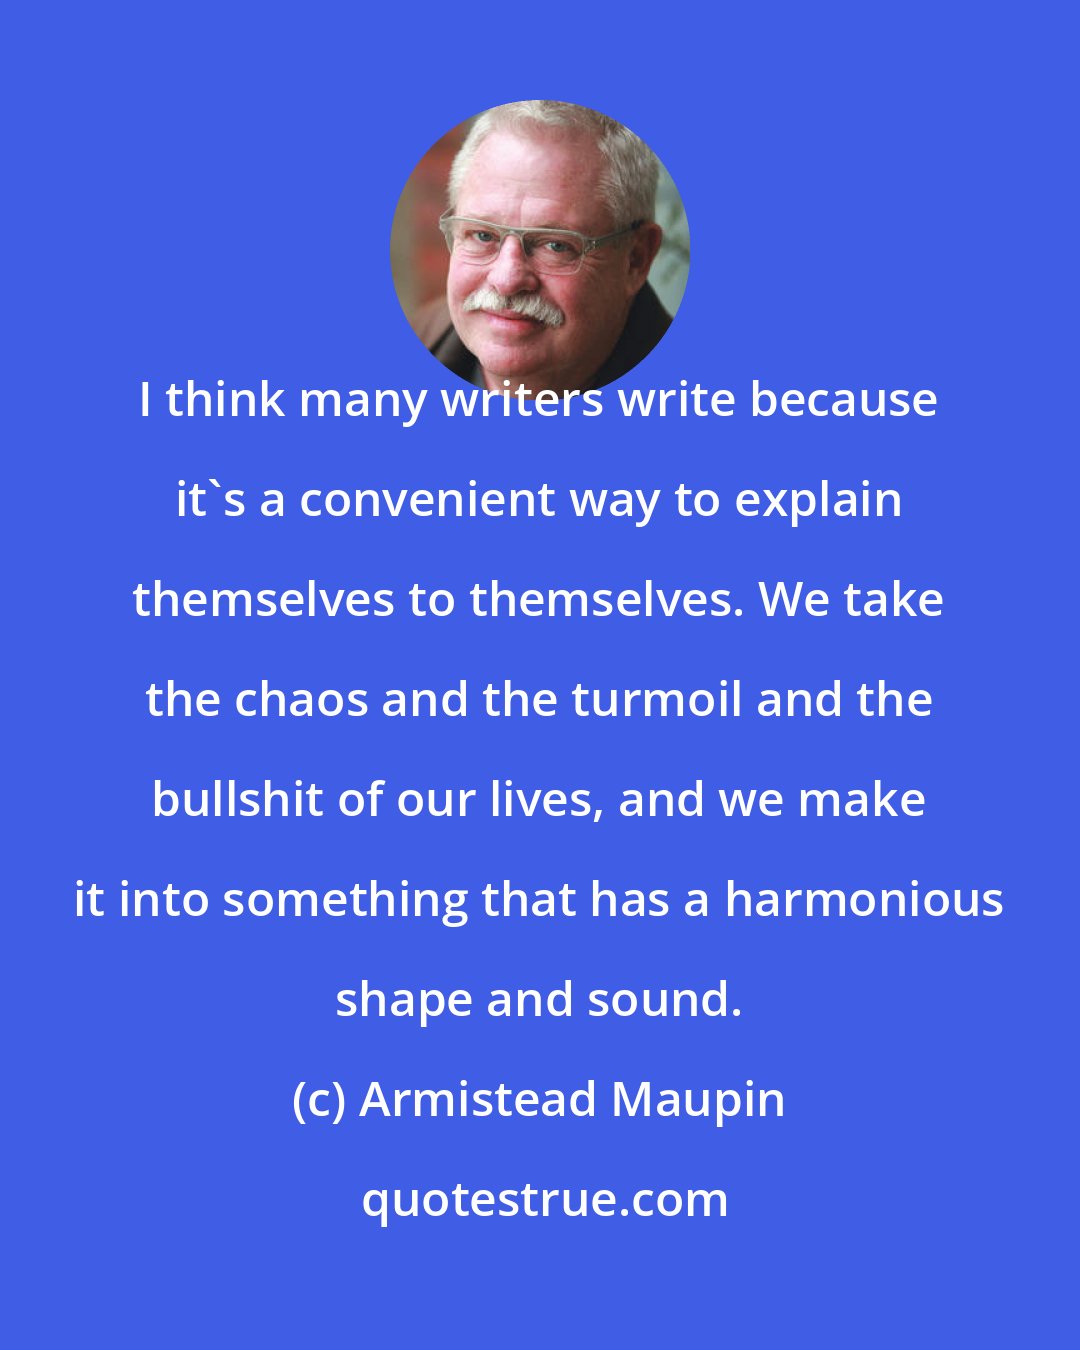 Armistead Maupin: I think many writers write because it's a convenient way to explain themselves to themselves. We take the chaos and the turmoil and the bullshit of our lives, and we make it into something that has a harmonious shape and sound.